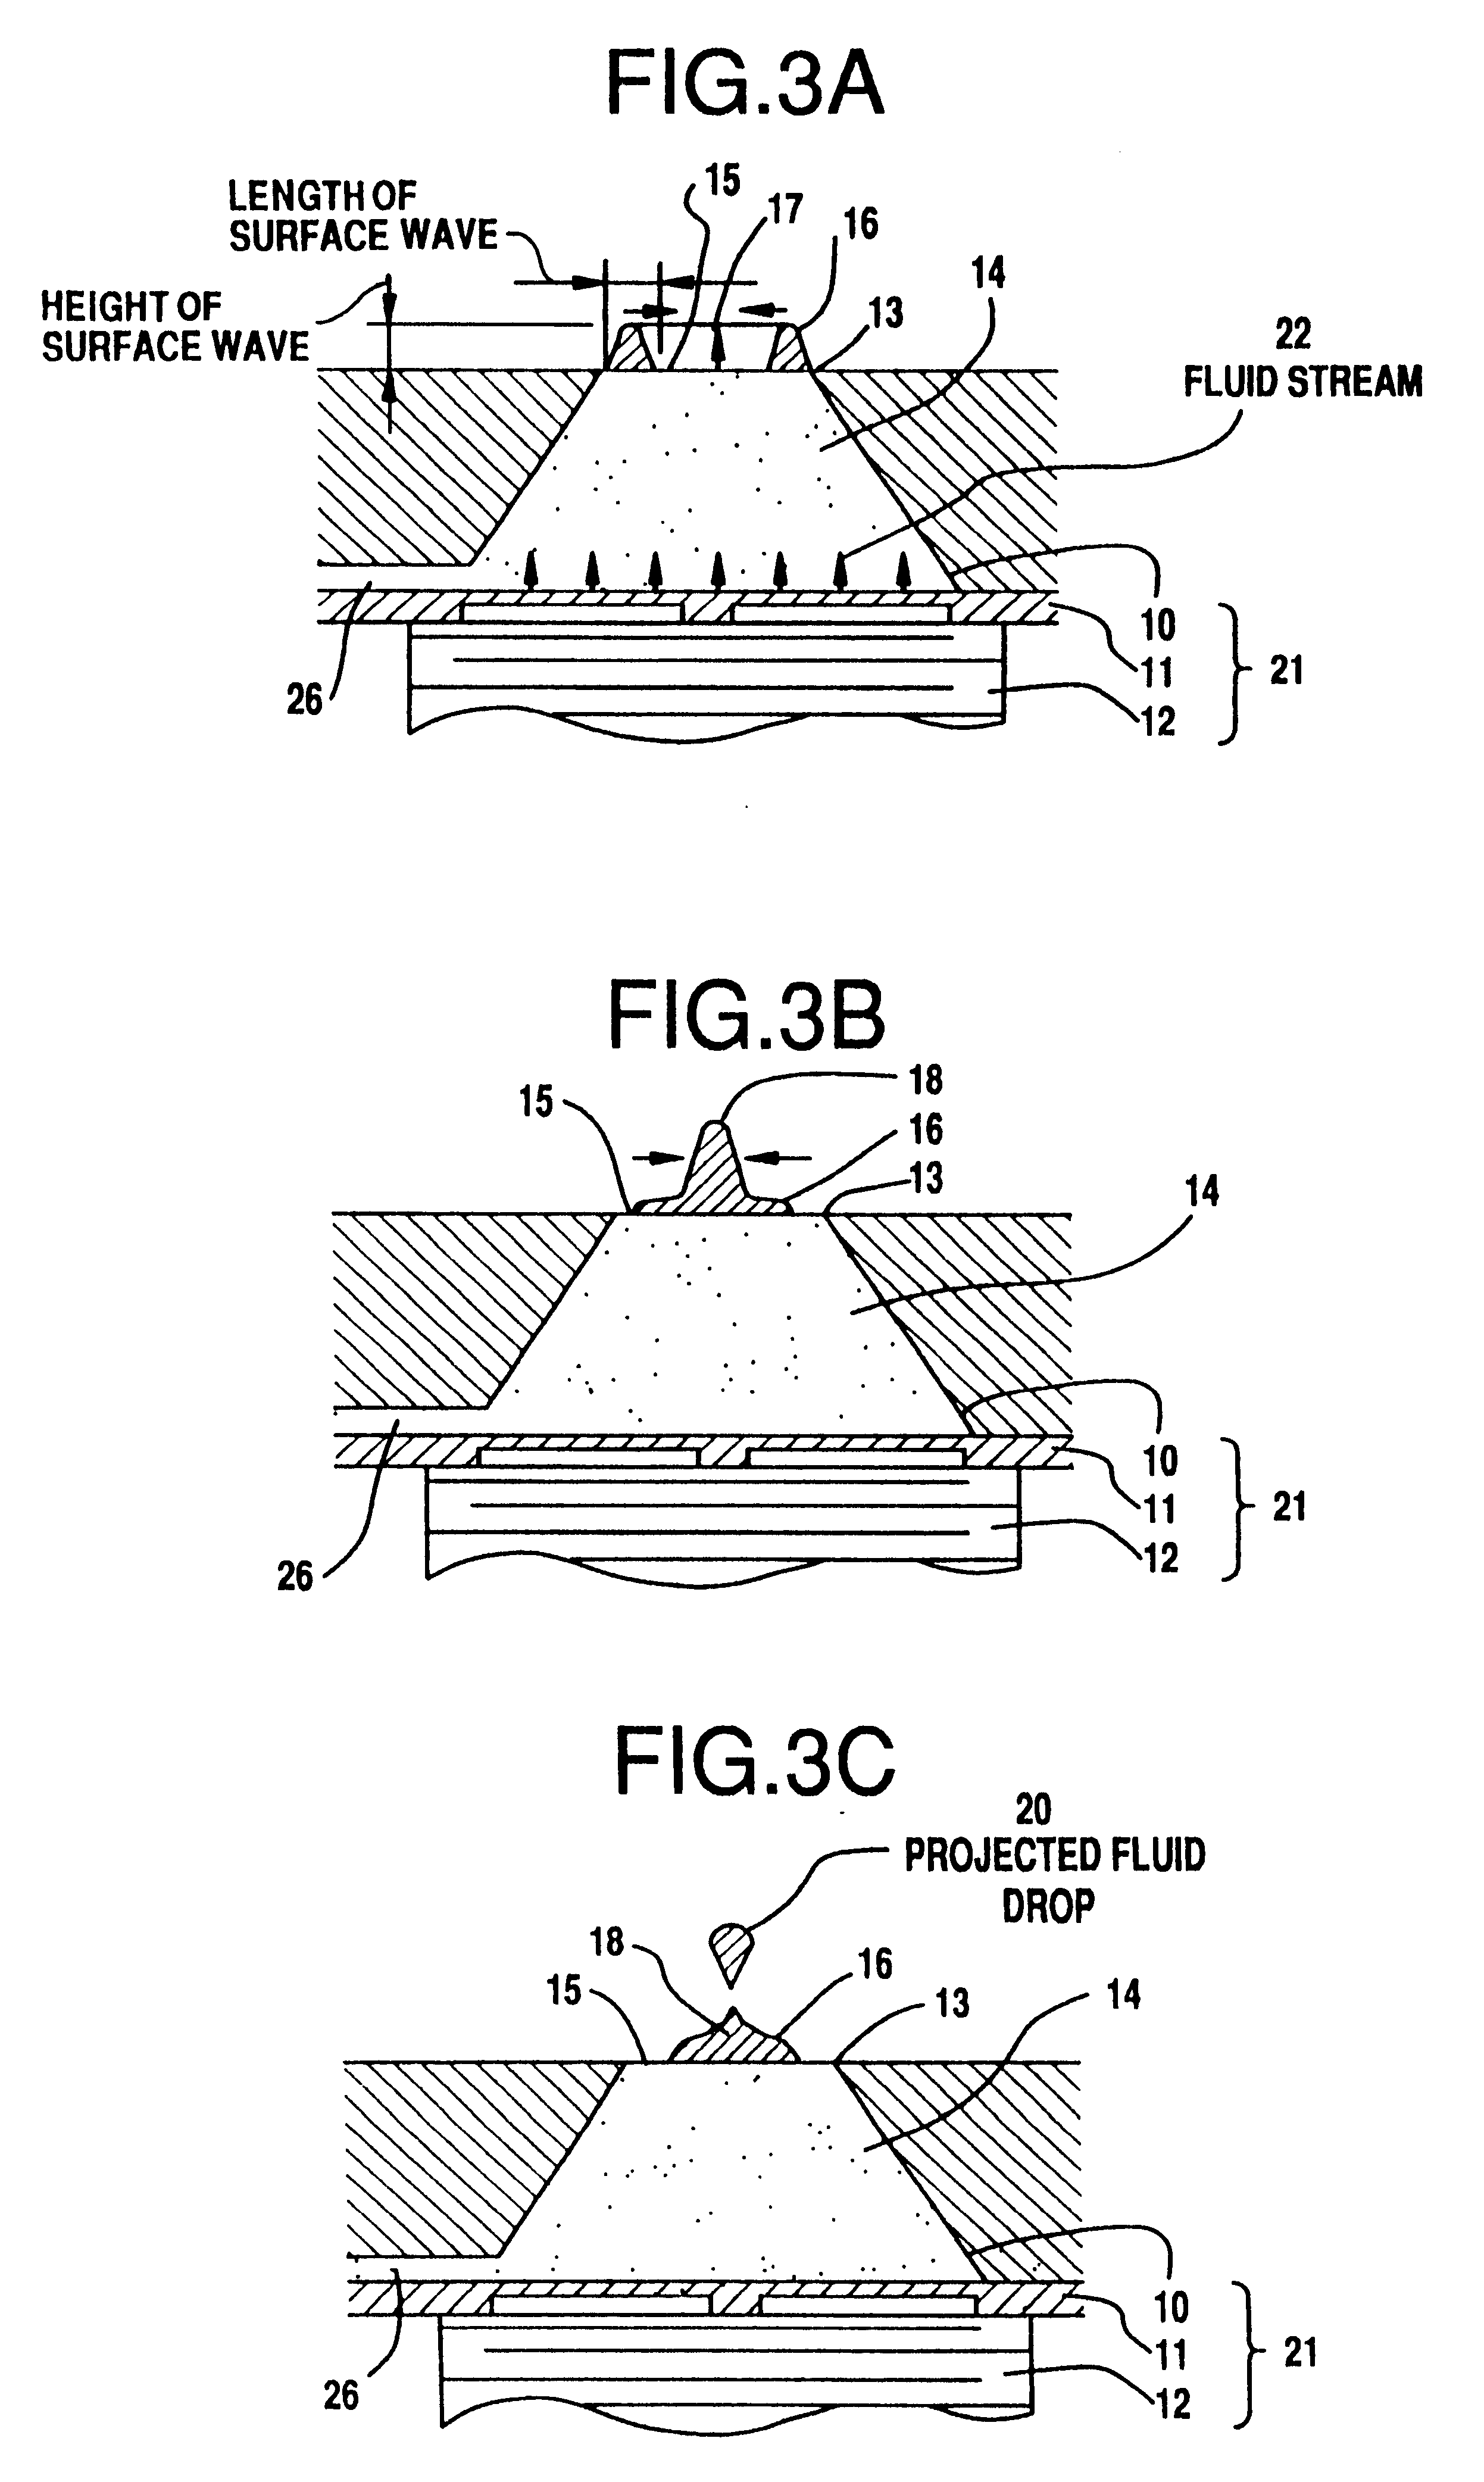 Fluid drop projecting head using taper-shaped chamber for generating a converging surface wave